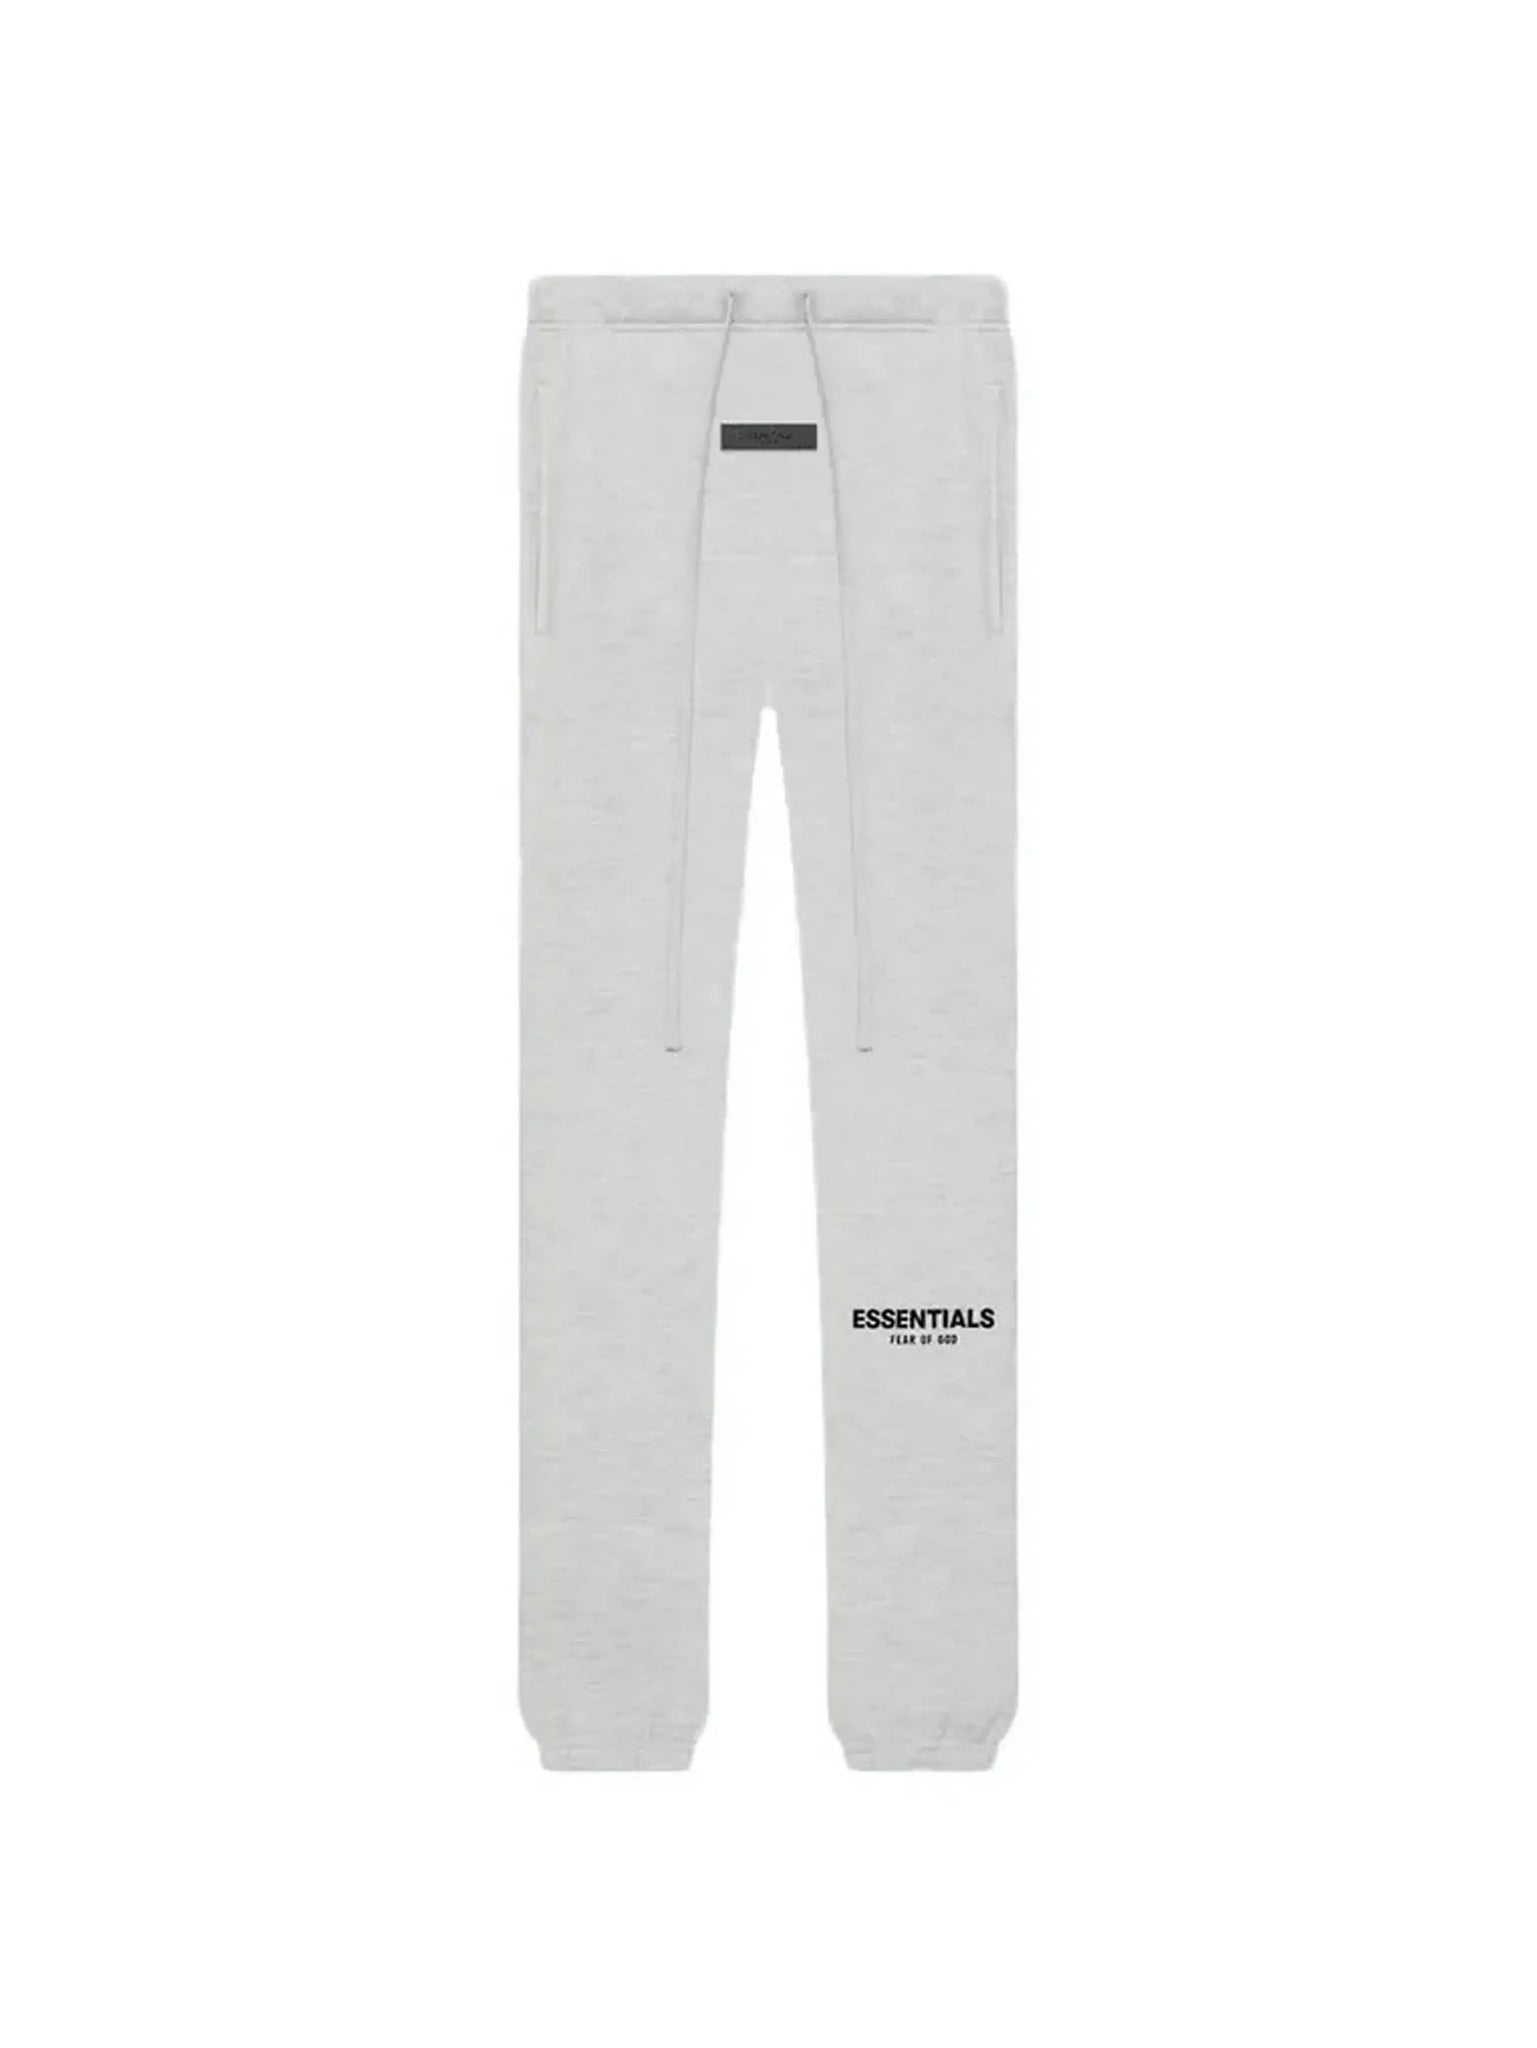 Fear of God Essentials Sweatpants (SS22) Light Oatmeal in Melbourne, Australia - Prior